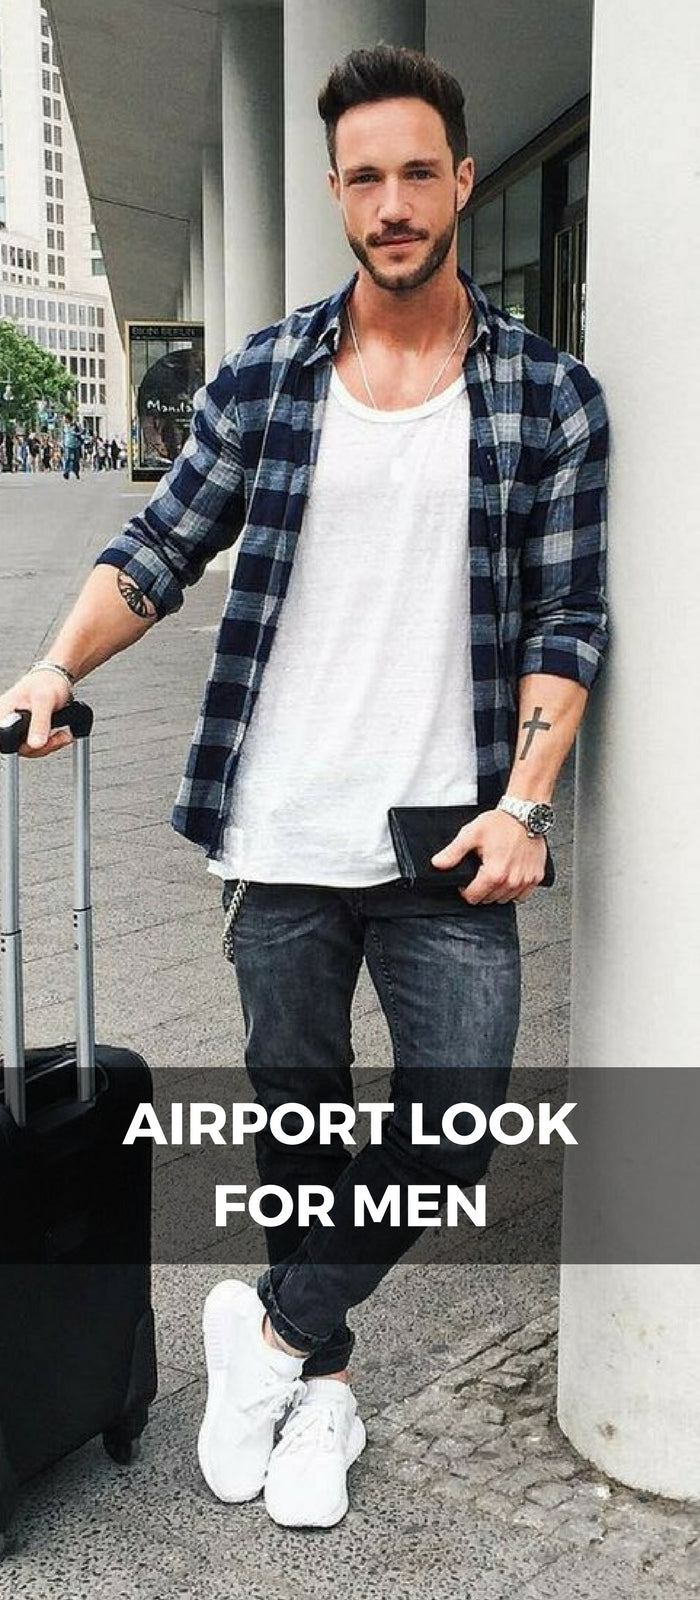 Airport Looks, Airport Outfit Ideas For Men